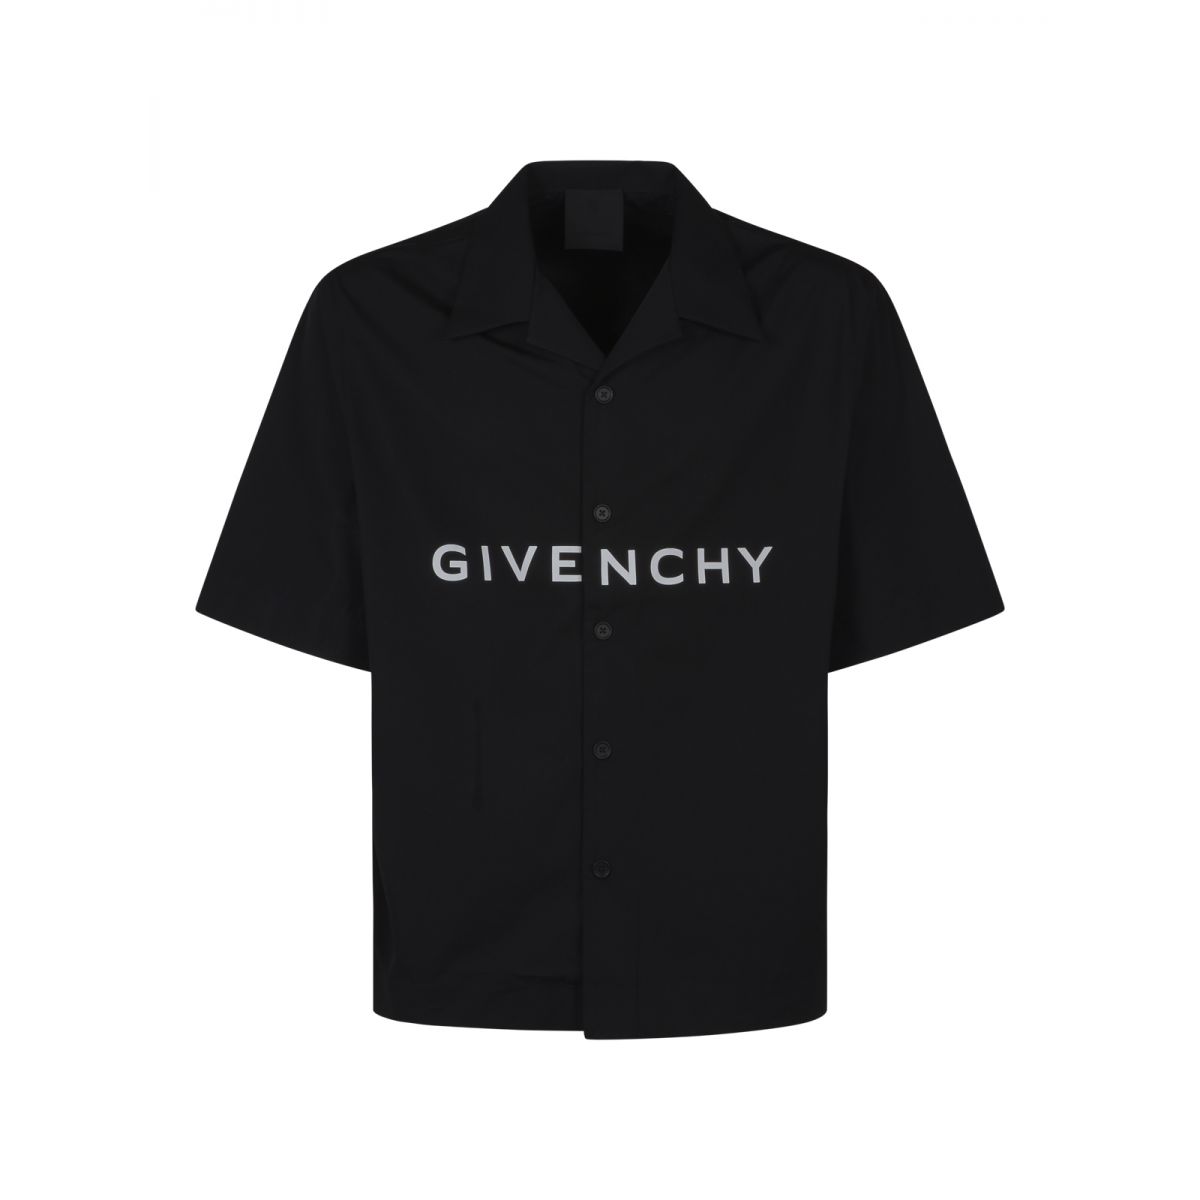 GIVENCHY - Short-sleeved shirt in cotton poplin